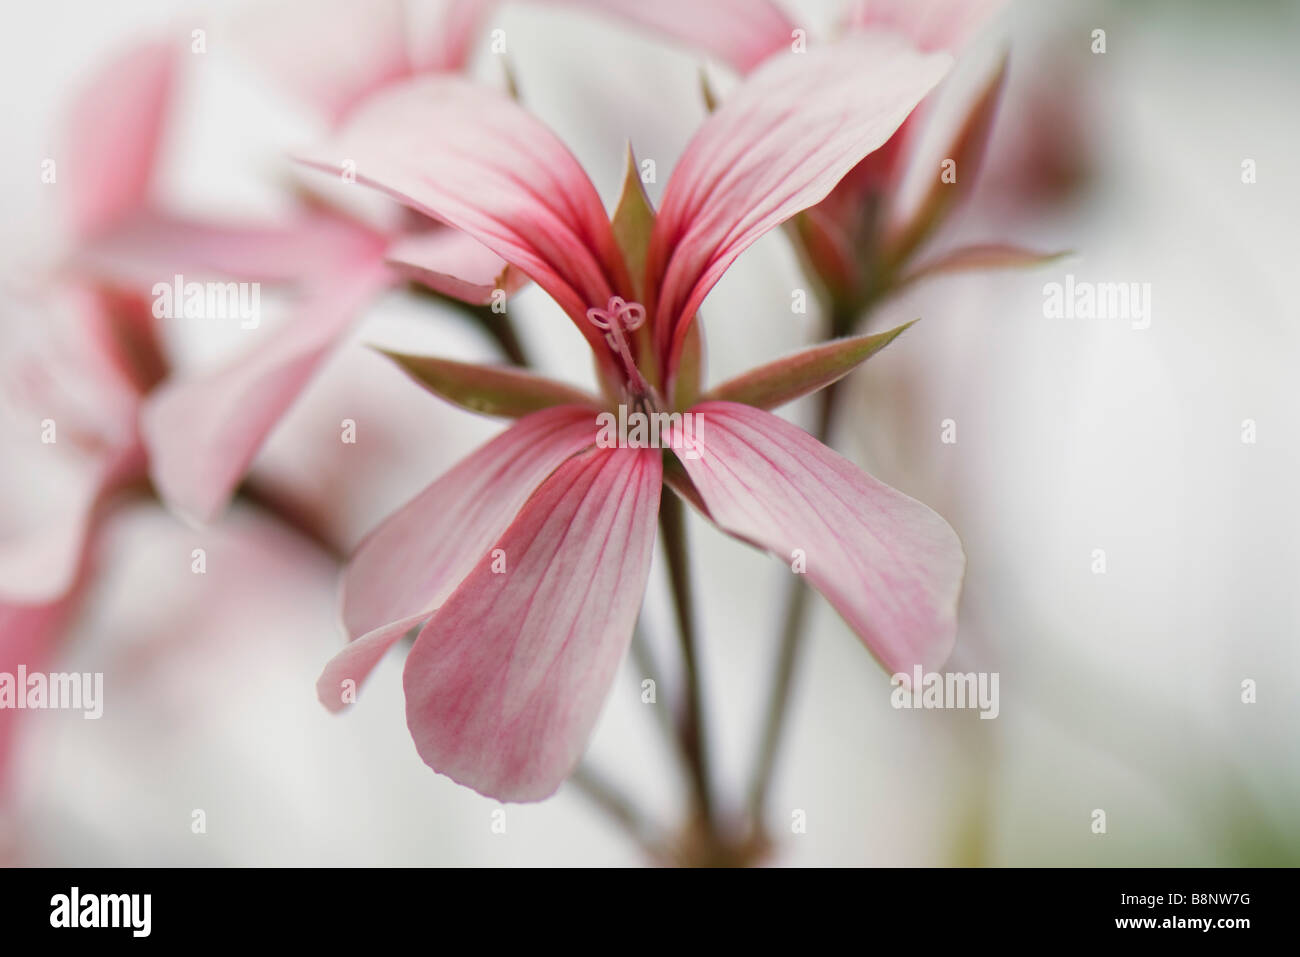 Pink flowers, close-up Stock Photo